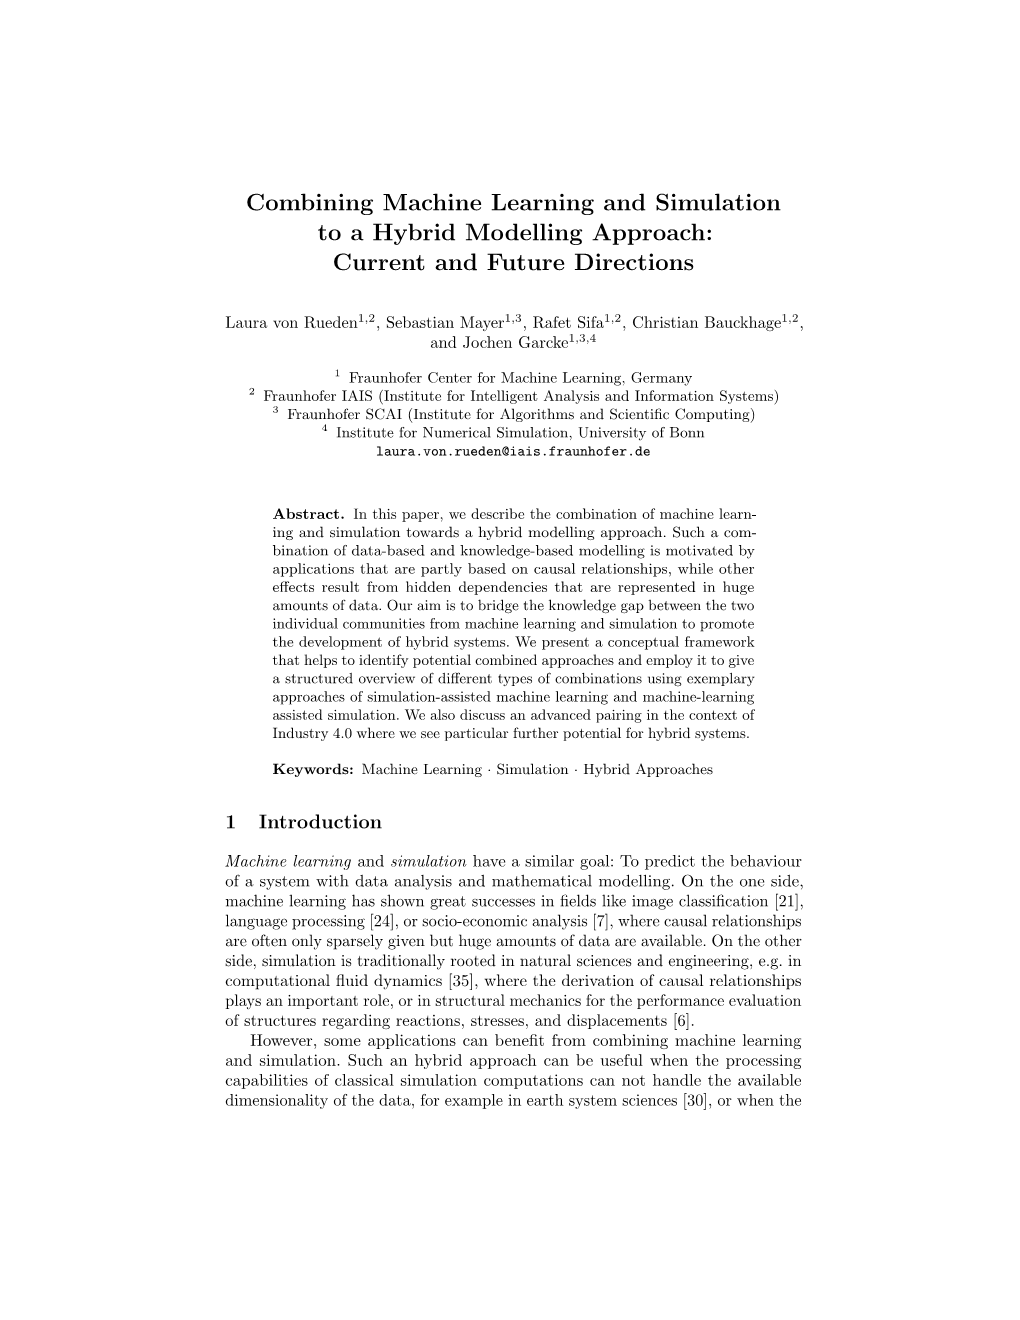 Combining Machine Learning and Simulation to a Hybrid Modelling Approach: Current and Future Directions